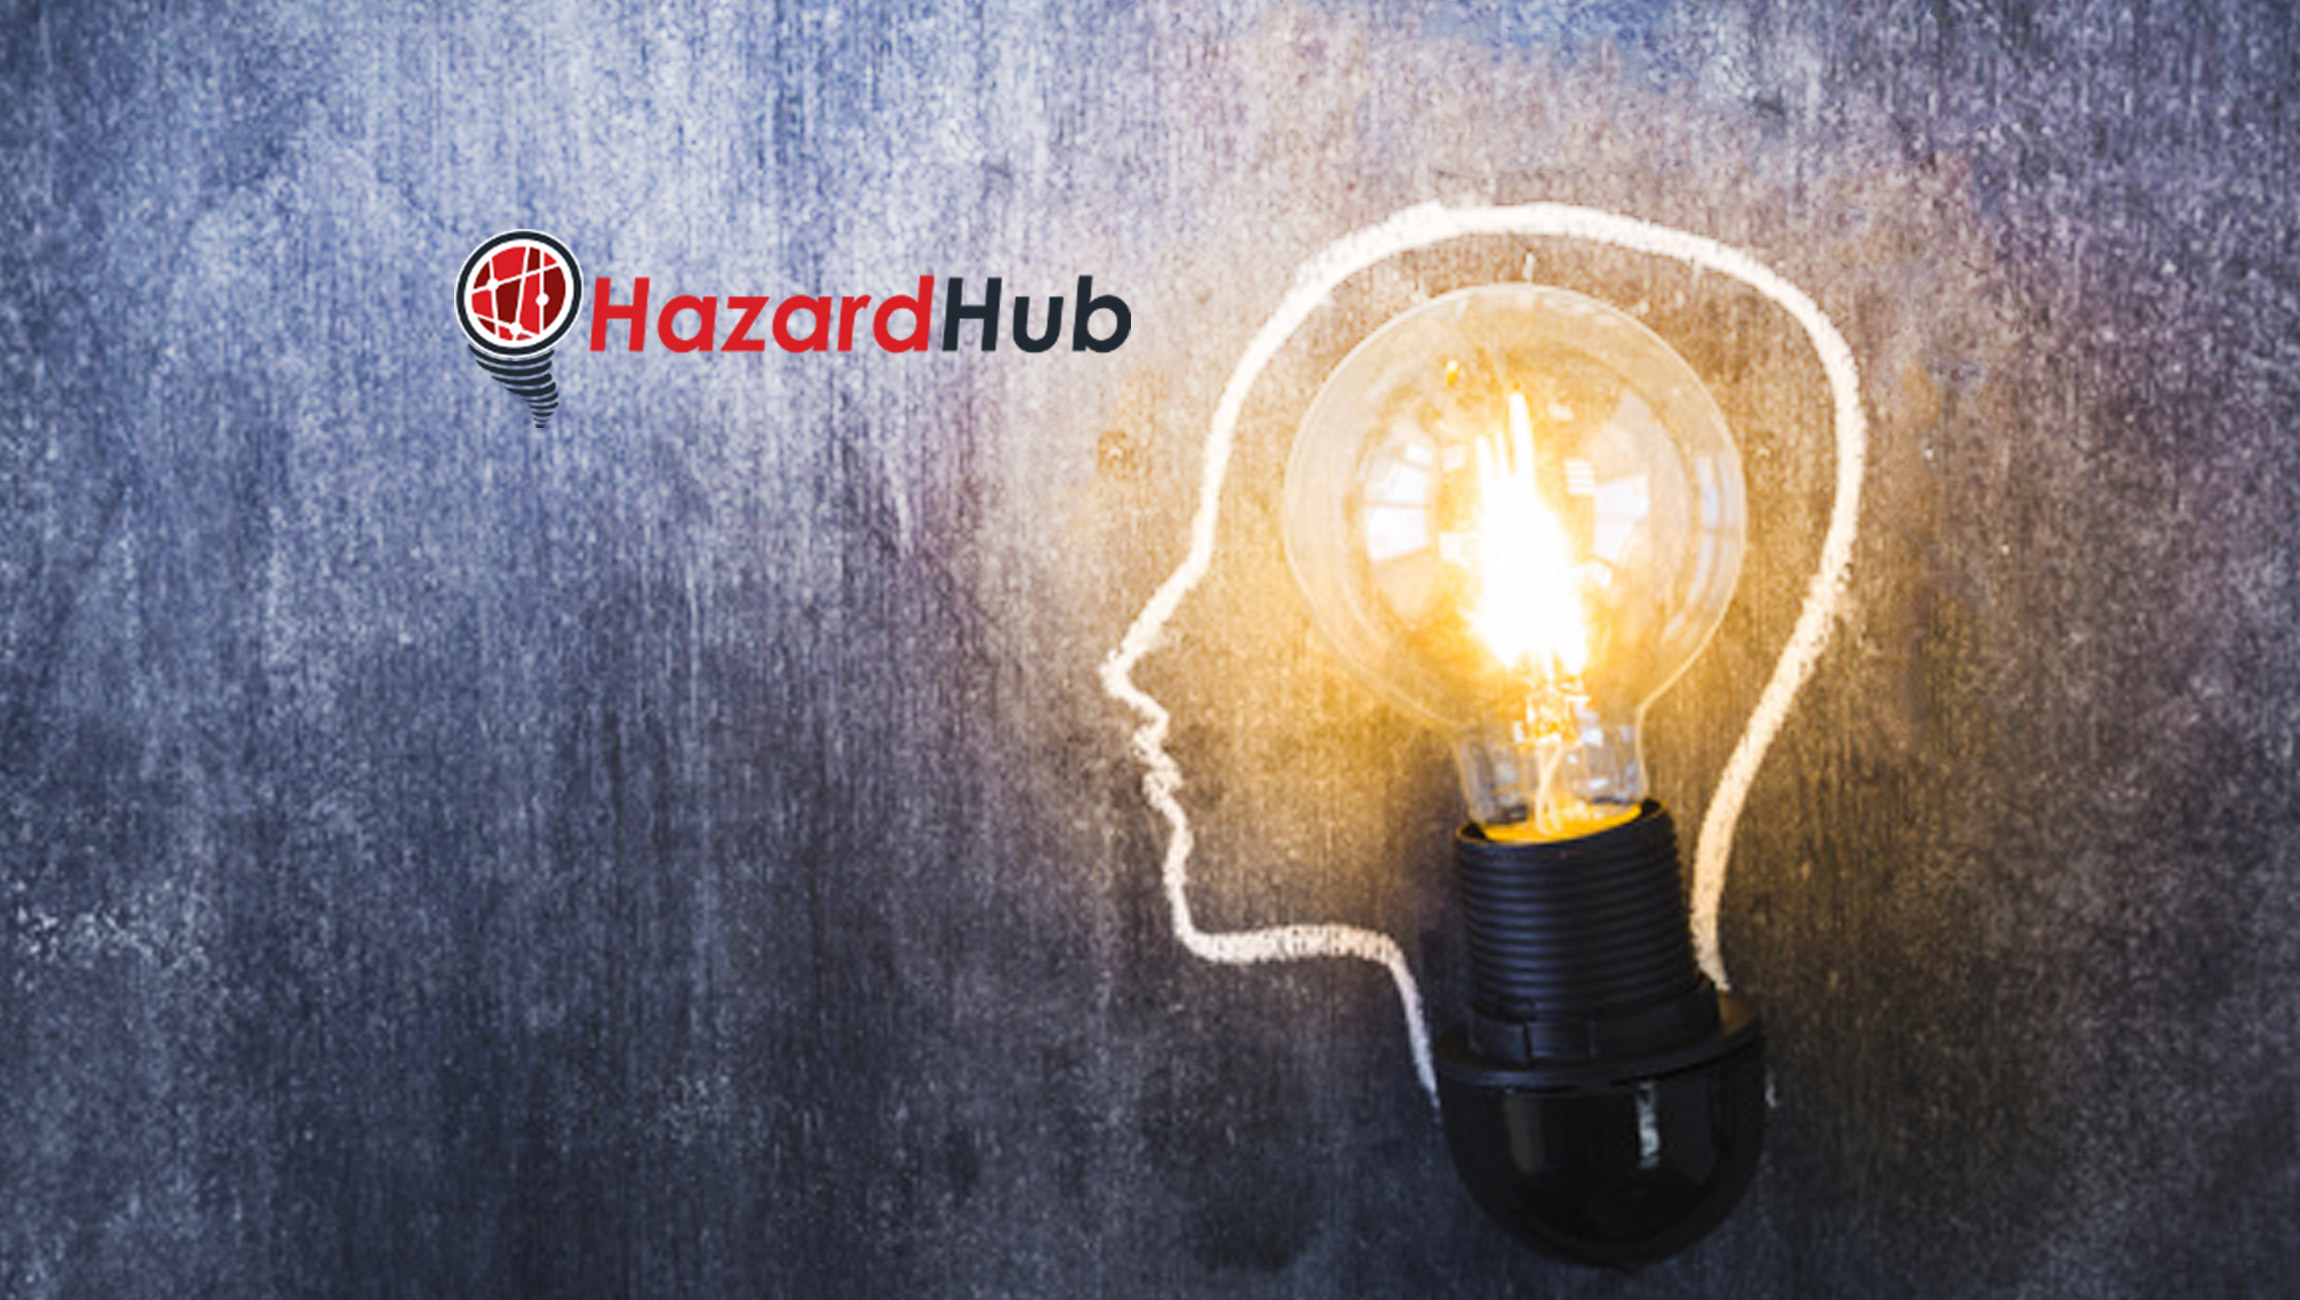 Hazardhub Named to the Insurtech 100 List of the World’s Most Innovative Companies